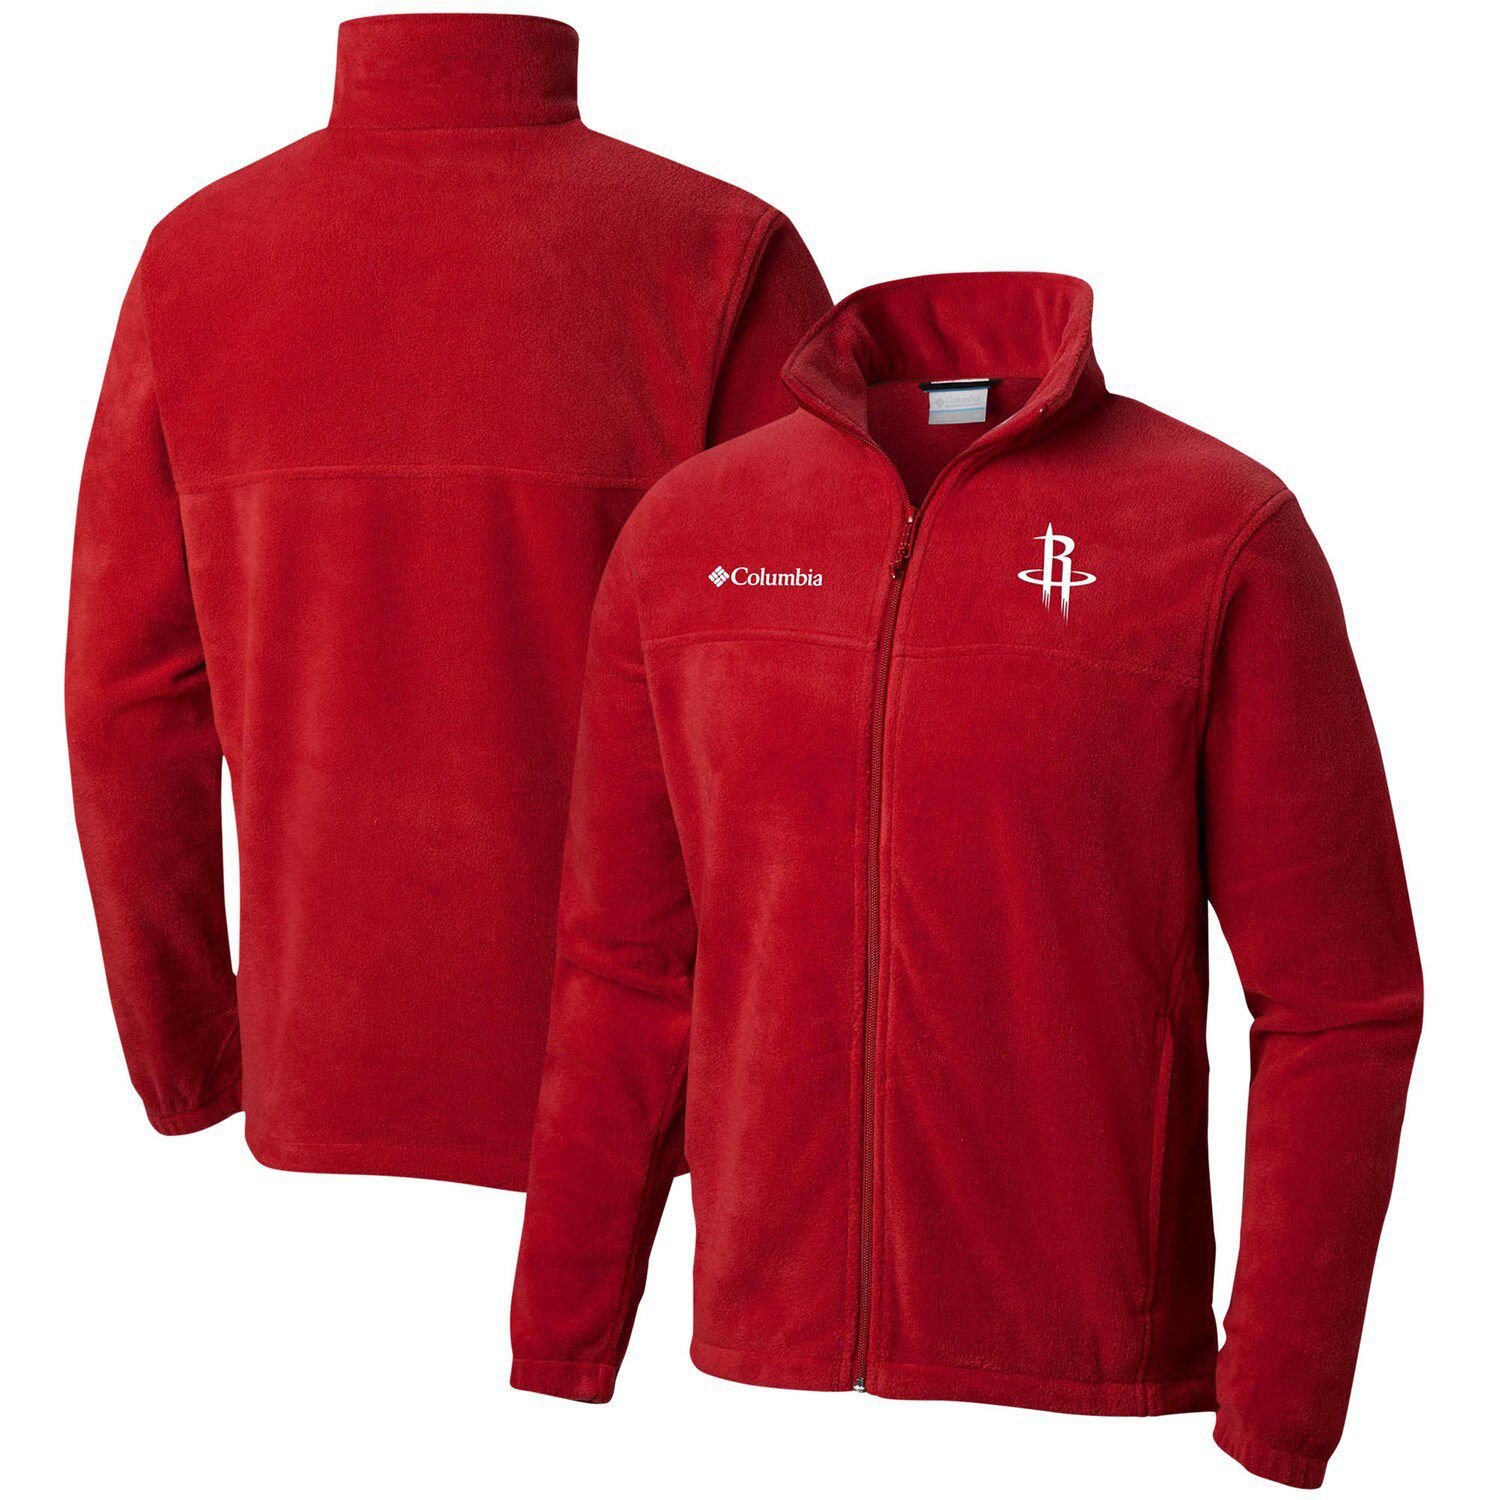 Image for Unbranded Men's Columbia Red Houston Rockets Steens Mountain 2.0 Full-Zip Jacket at Kohl's.